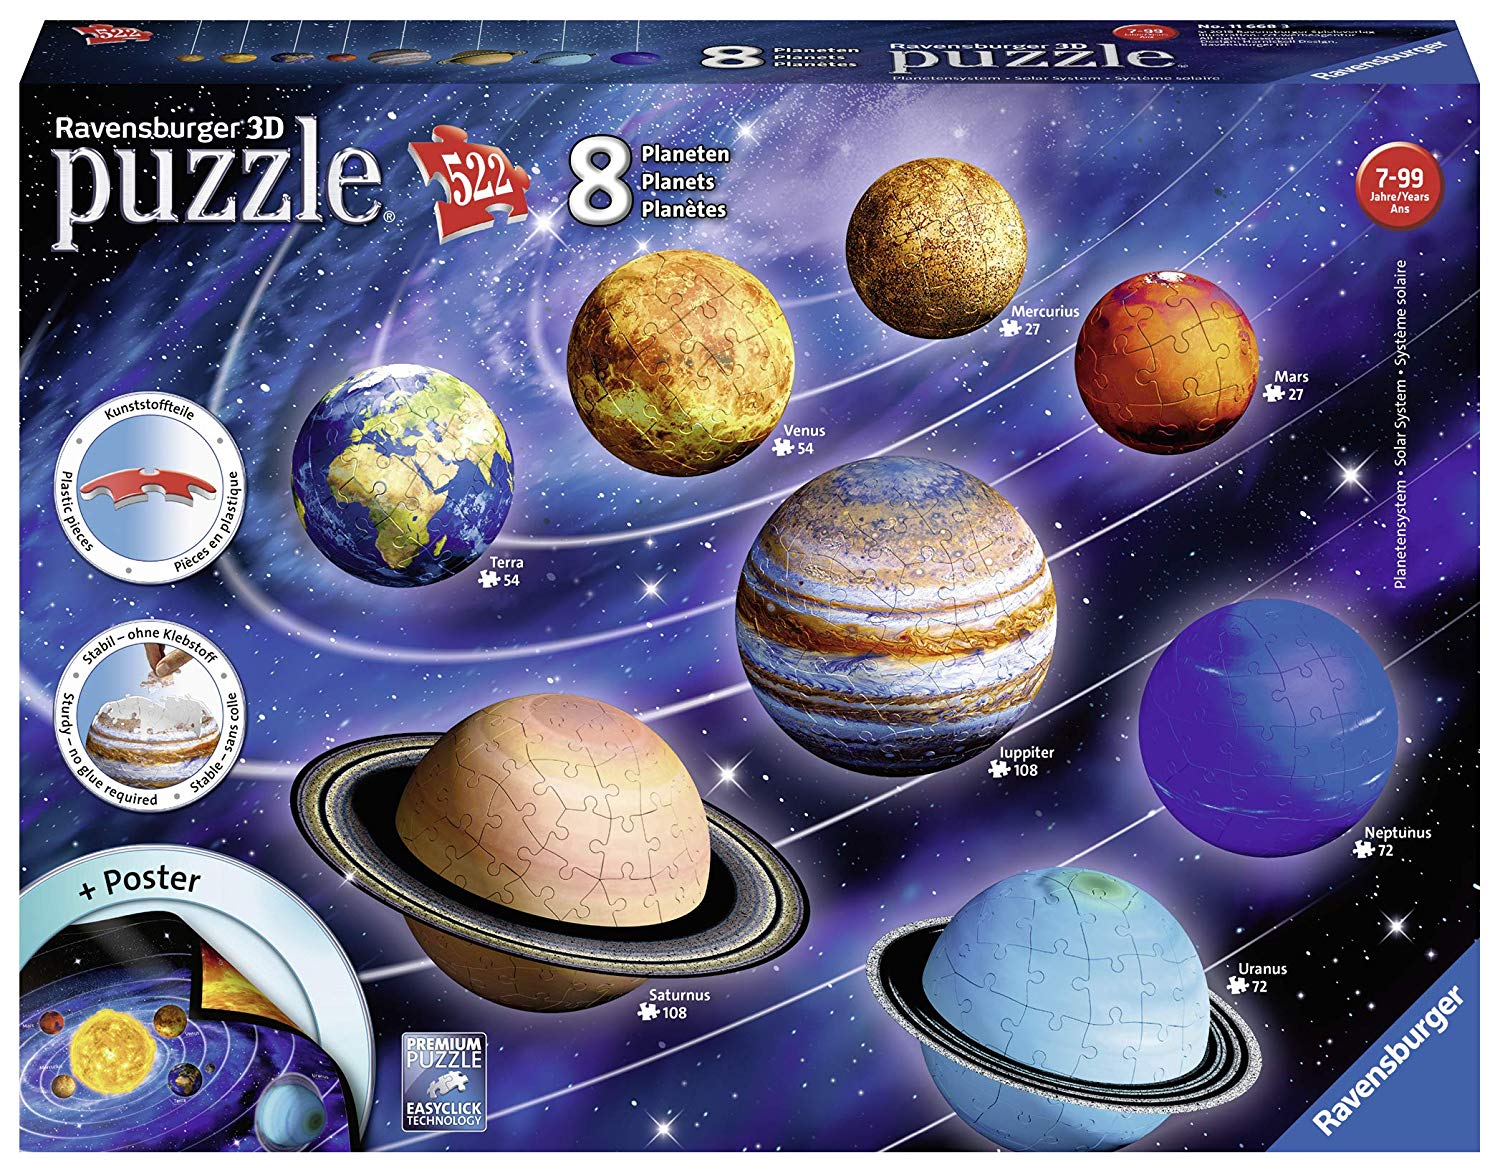 Ravensburger 11668 Adult Puzzle Planetary System, 3D Puzzle. Multi-Coloured